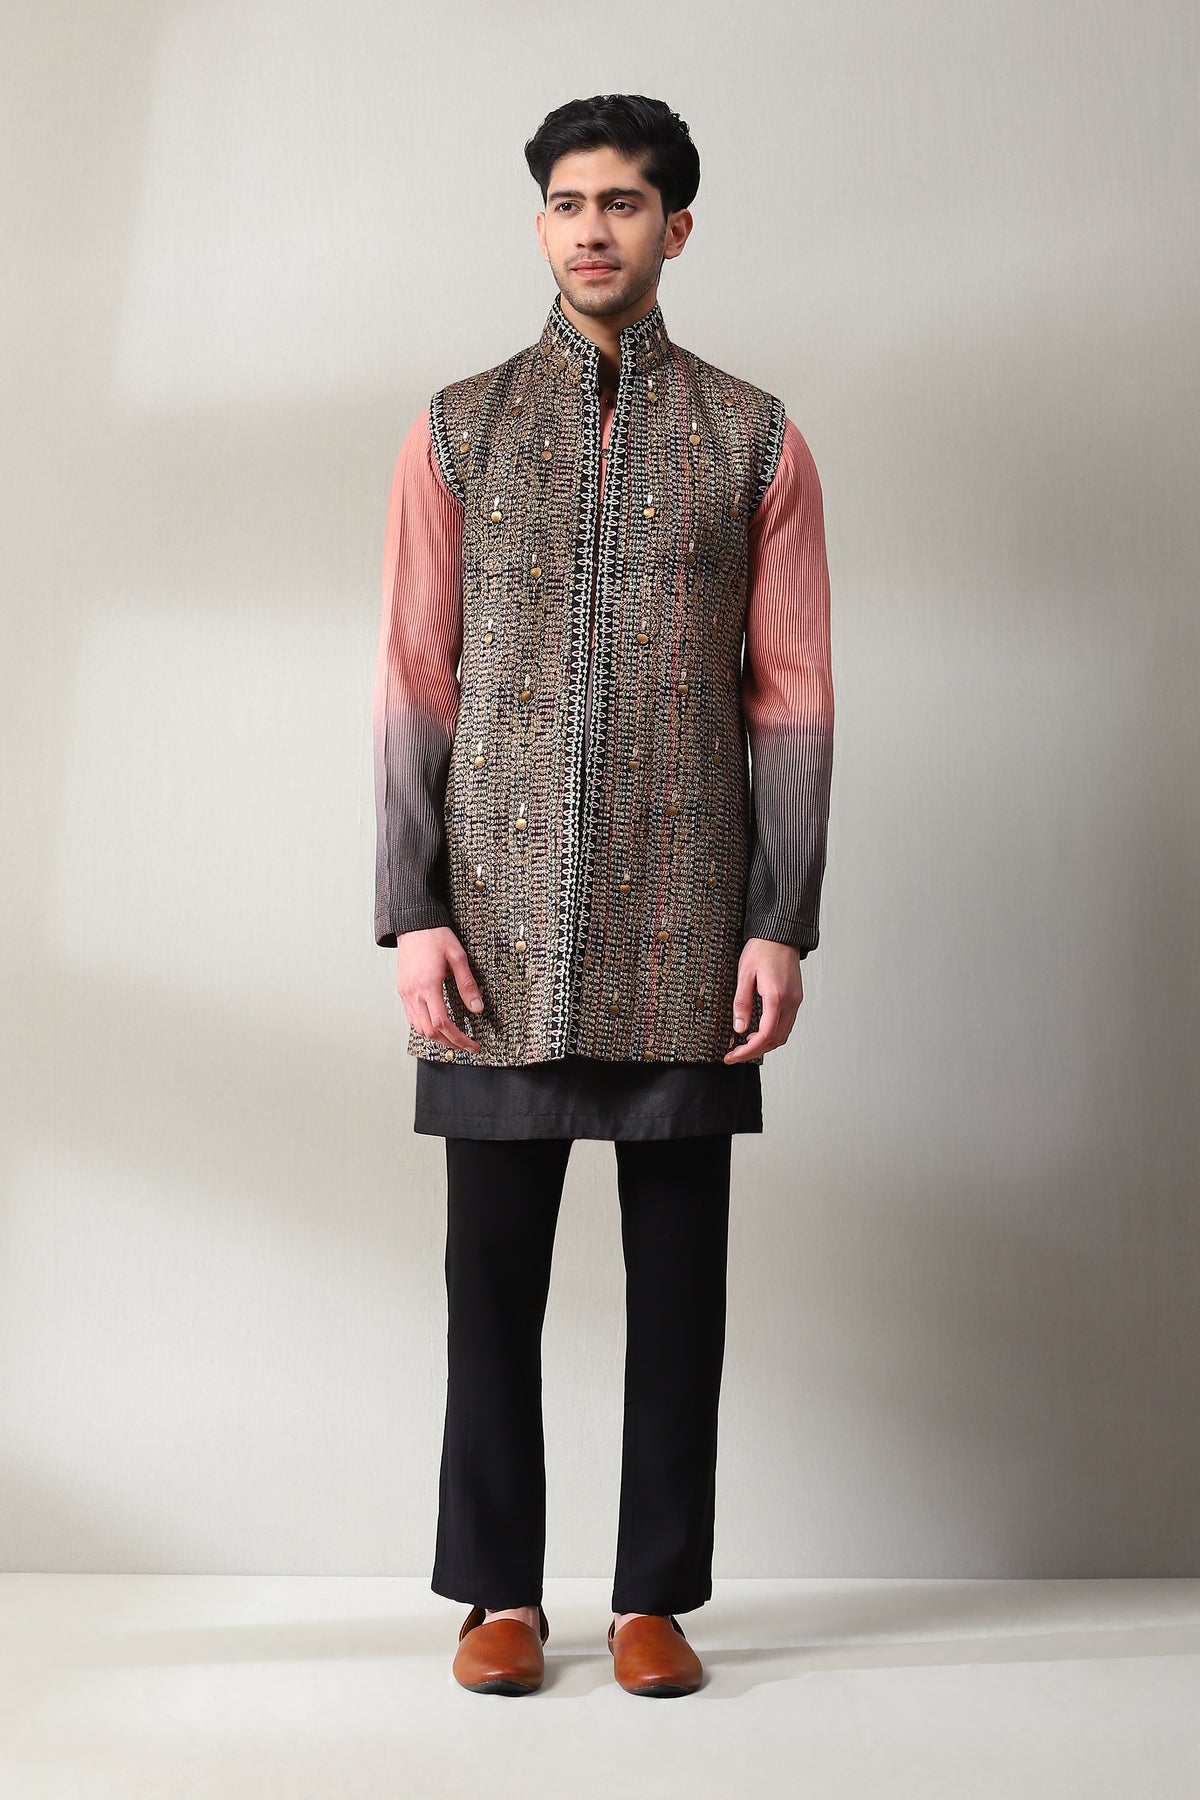 This handloom black and multicoloured long sleeveless jacket with the slim pants